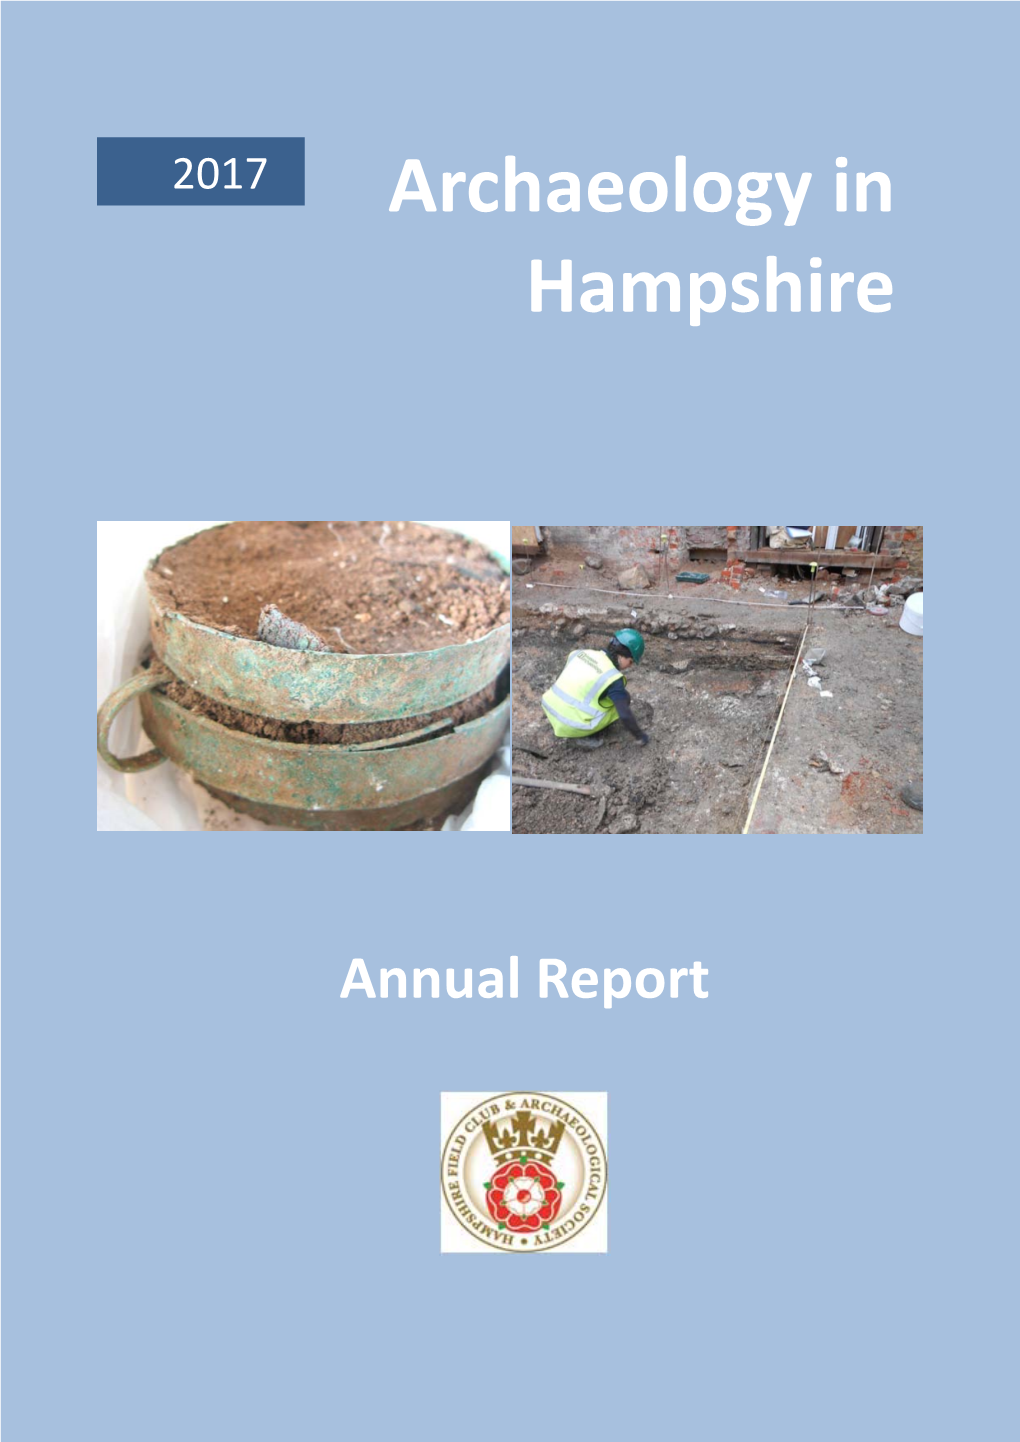 Archaeology in Hampshire for 2017